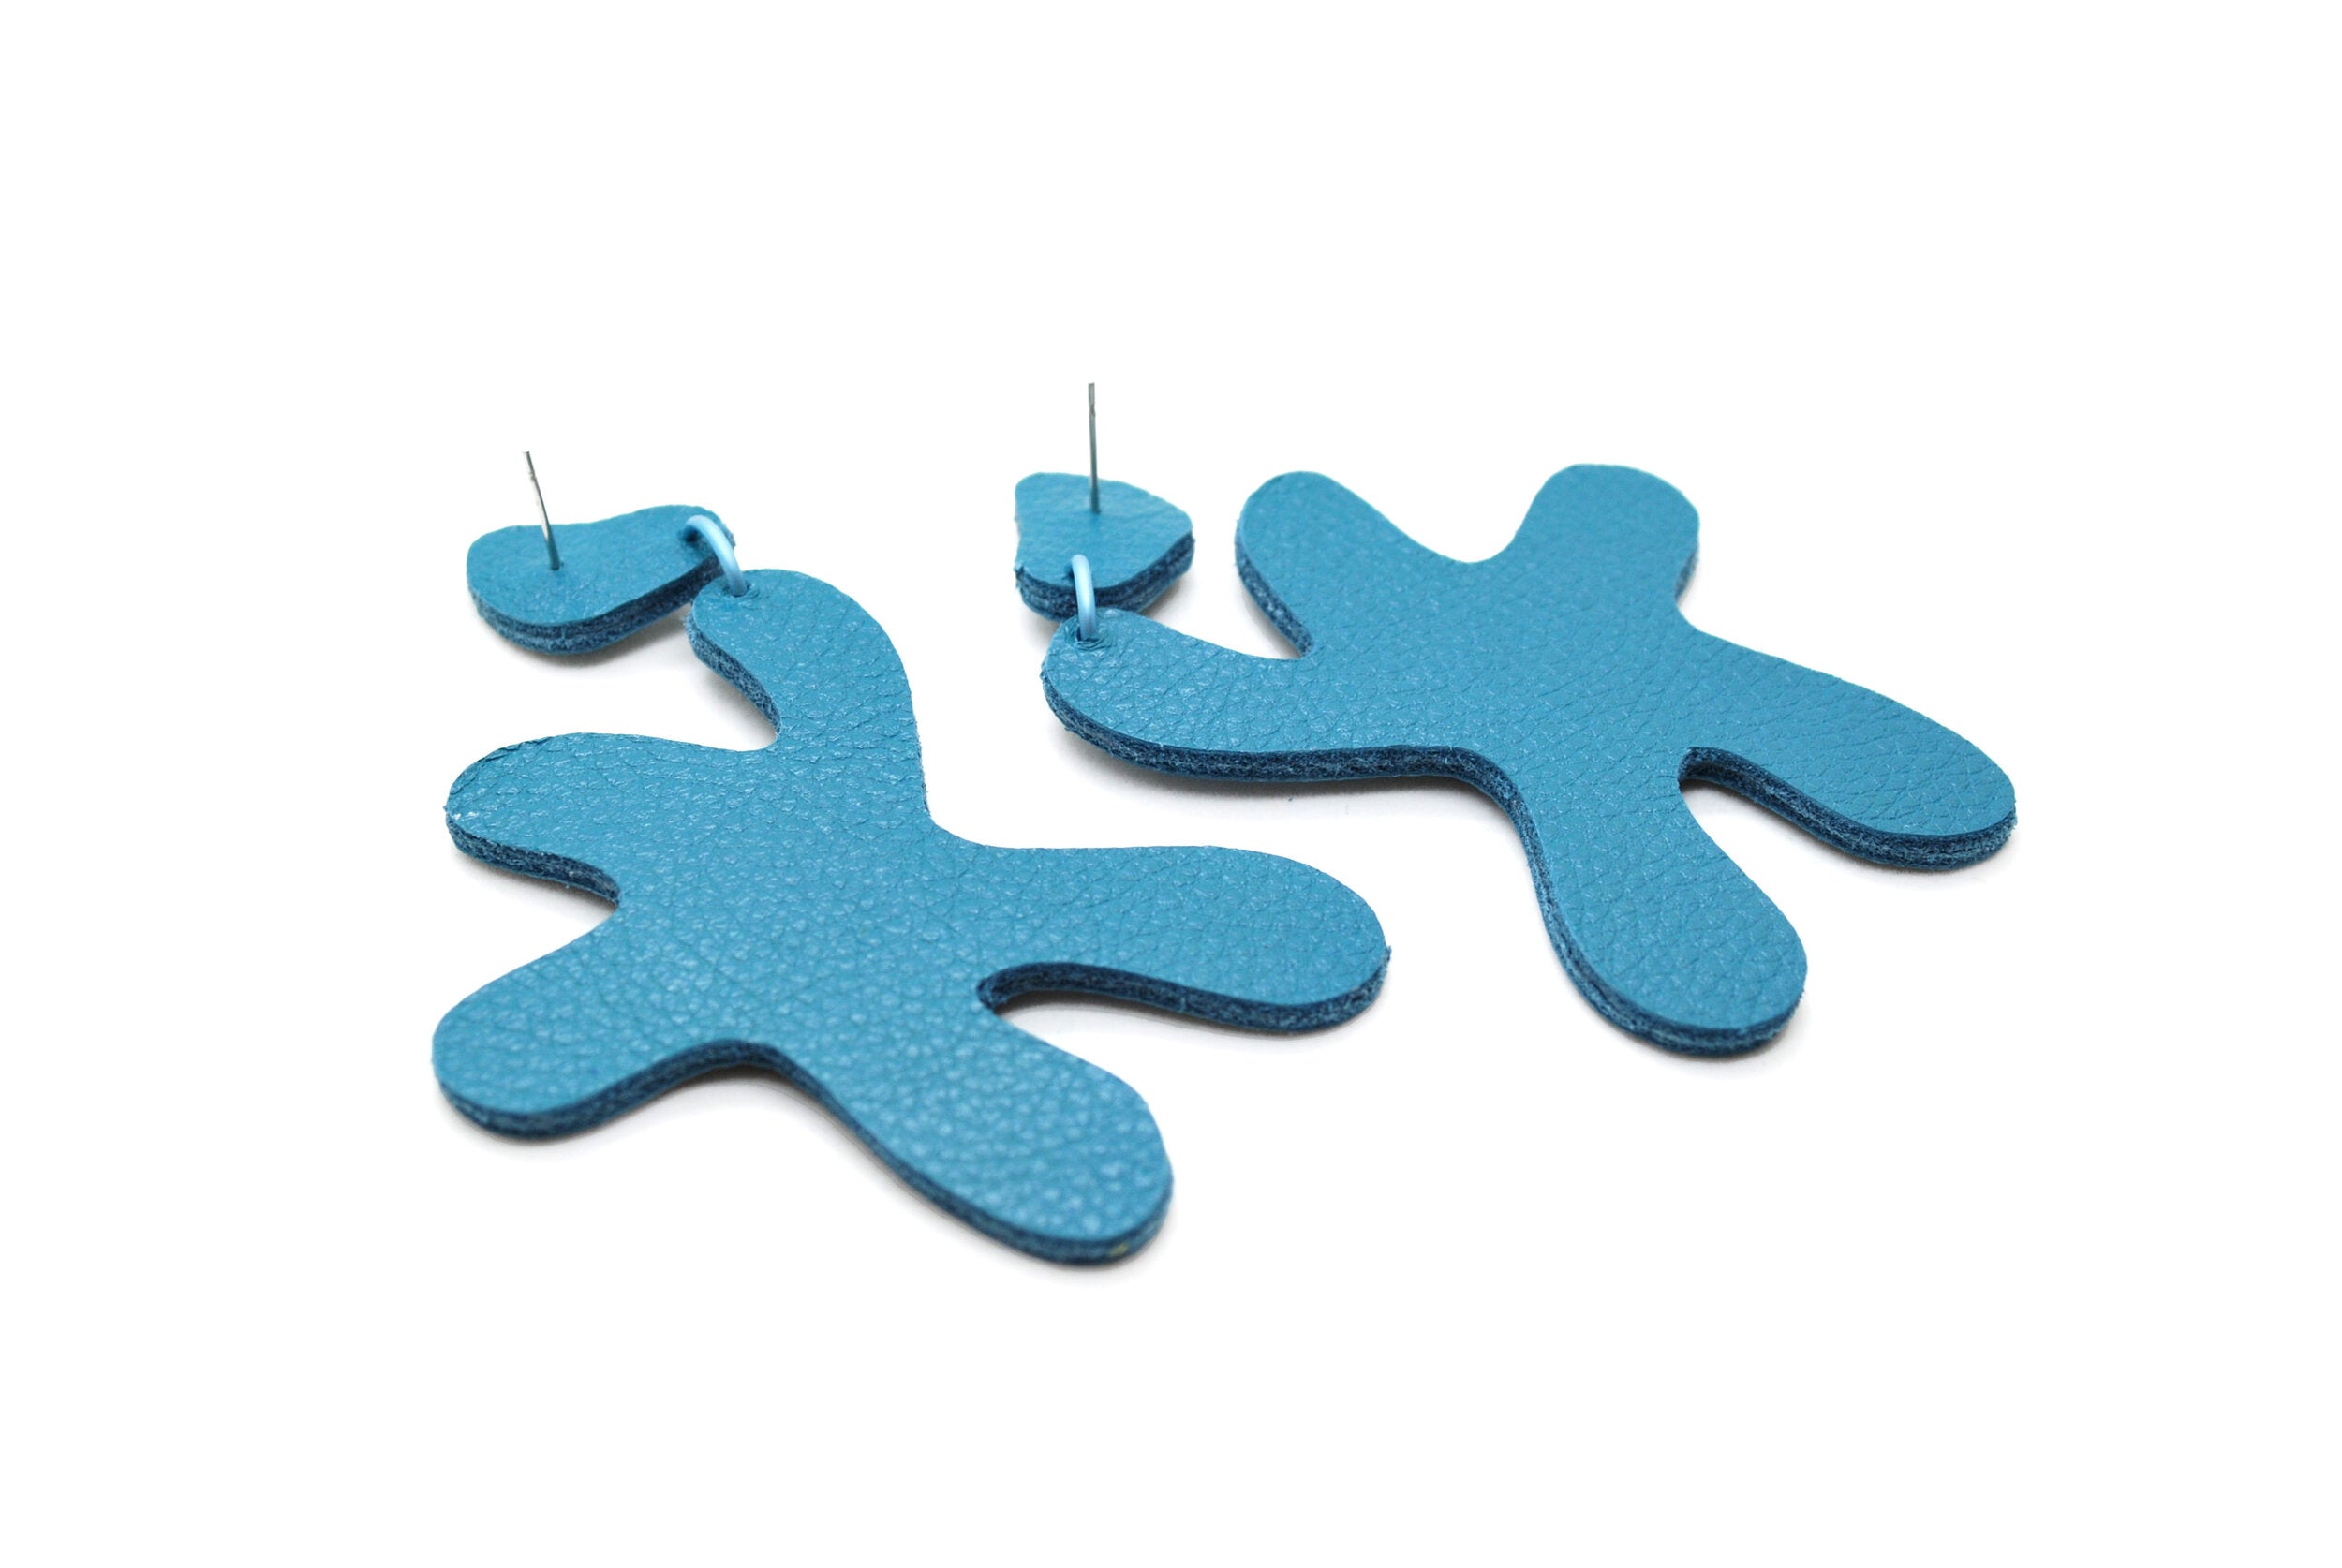 monochrome leather star shaped earrings in teal.